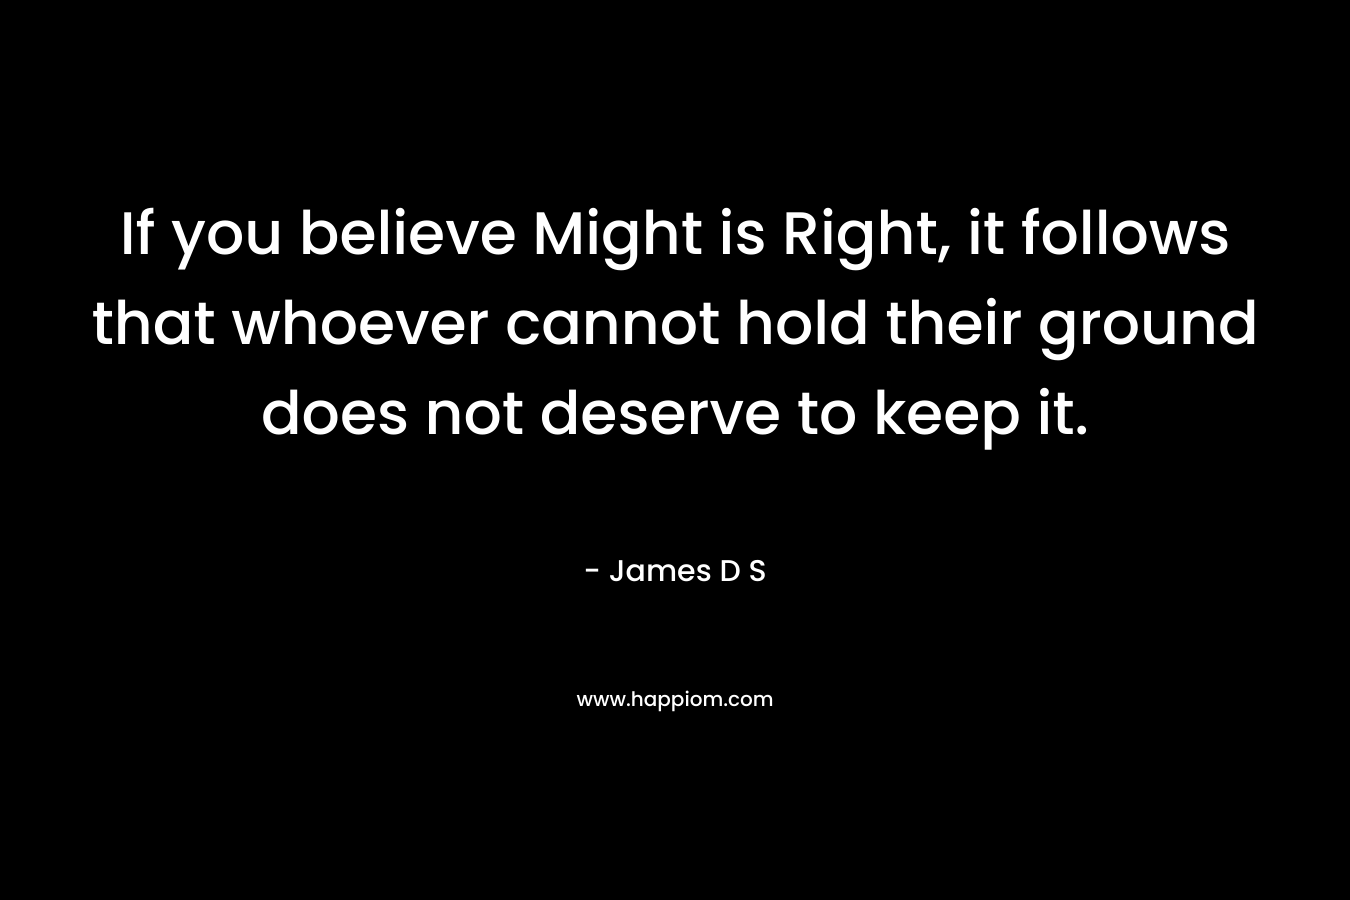 If you believe Might is Right, it follows that whoever cannot hold their ground does not deserve to keep it.